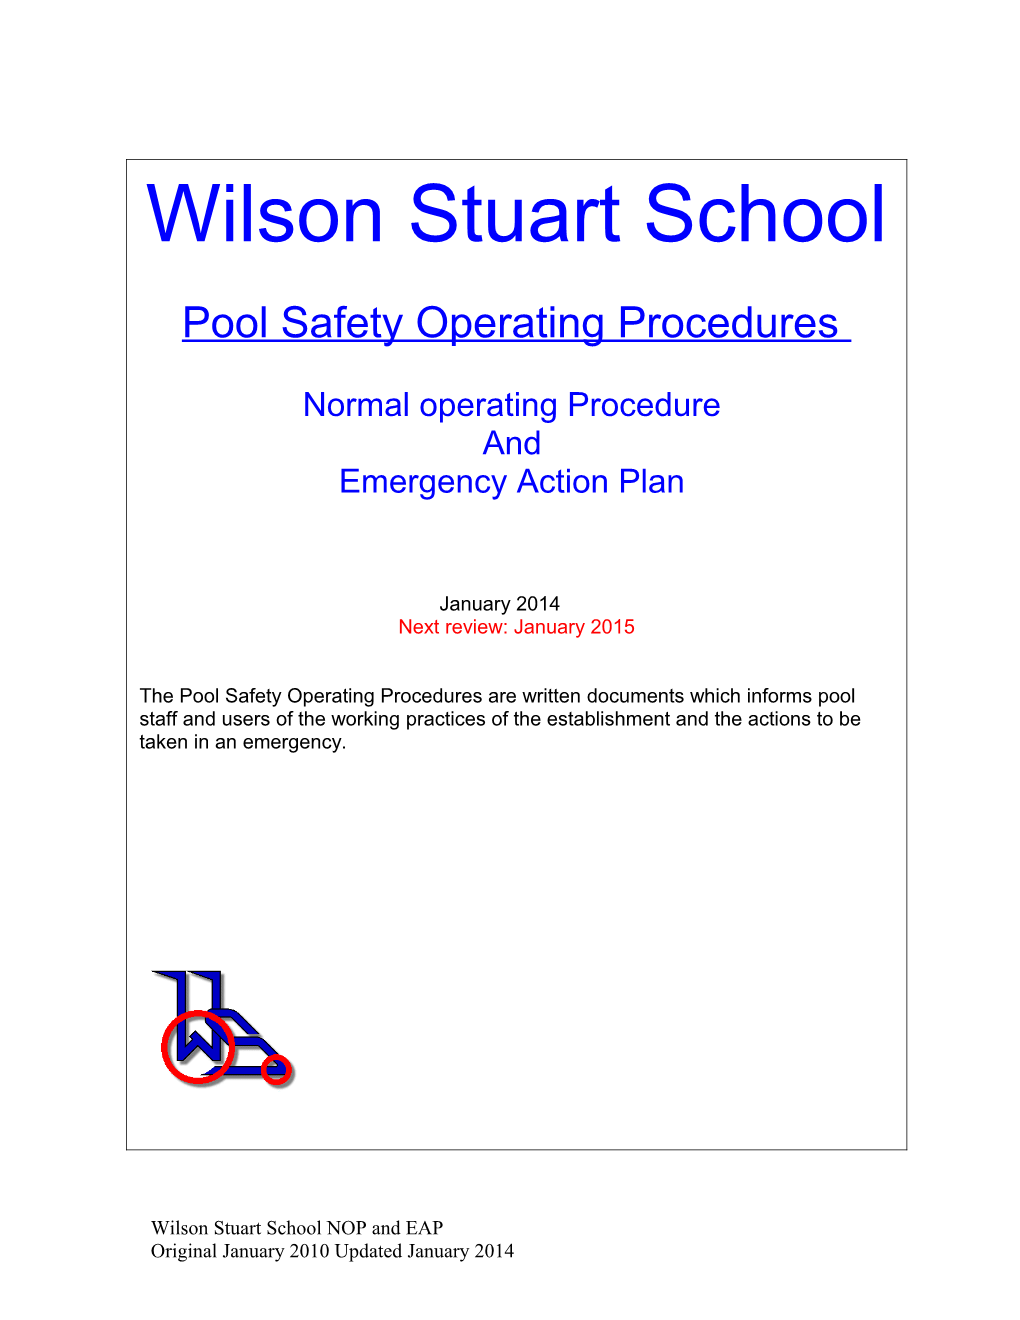 The Pool Safety Operating Procedures Are Written Documents Which Informs Pool Staff And